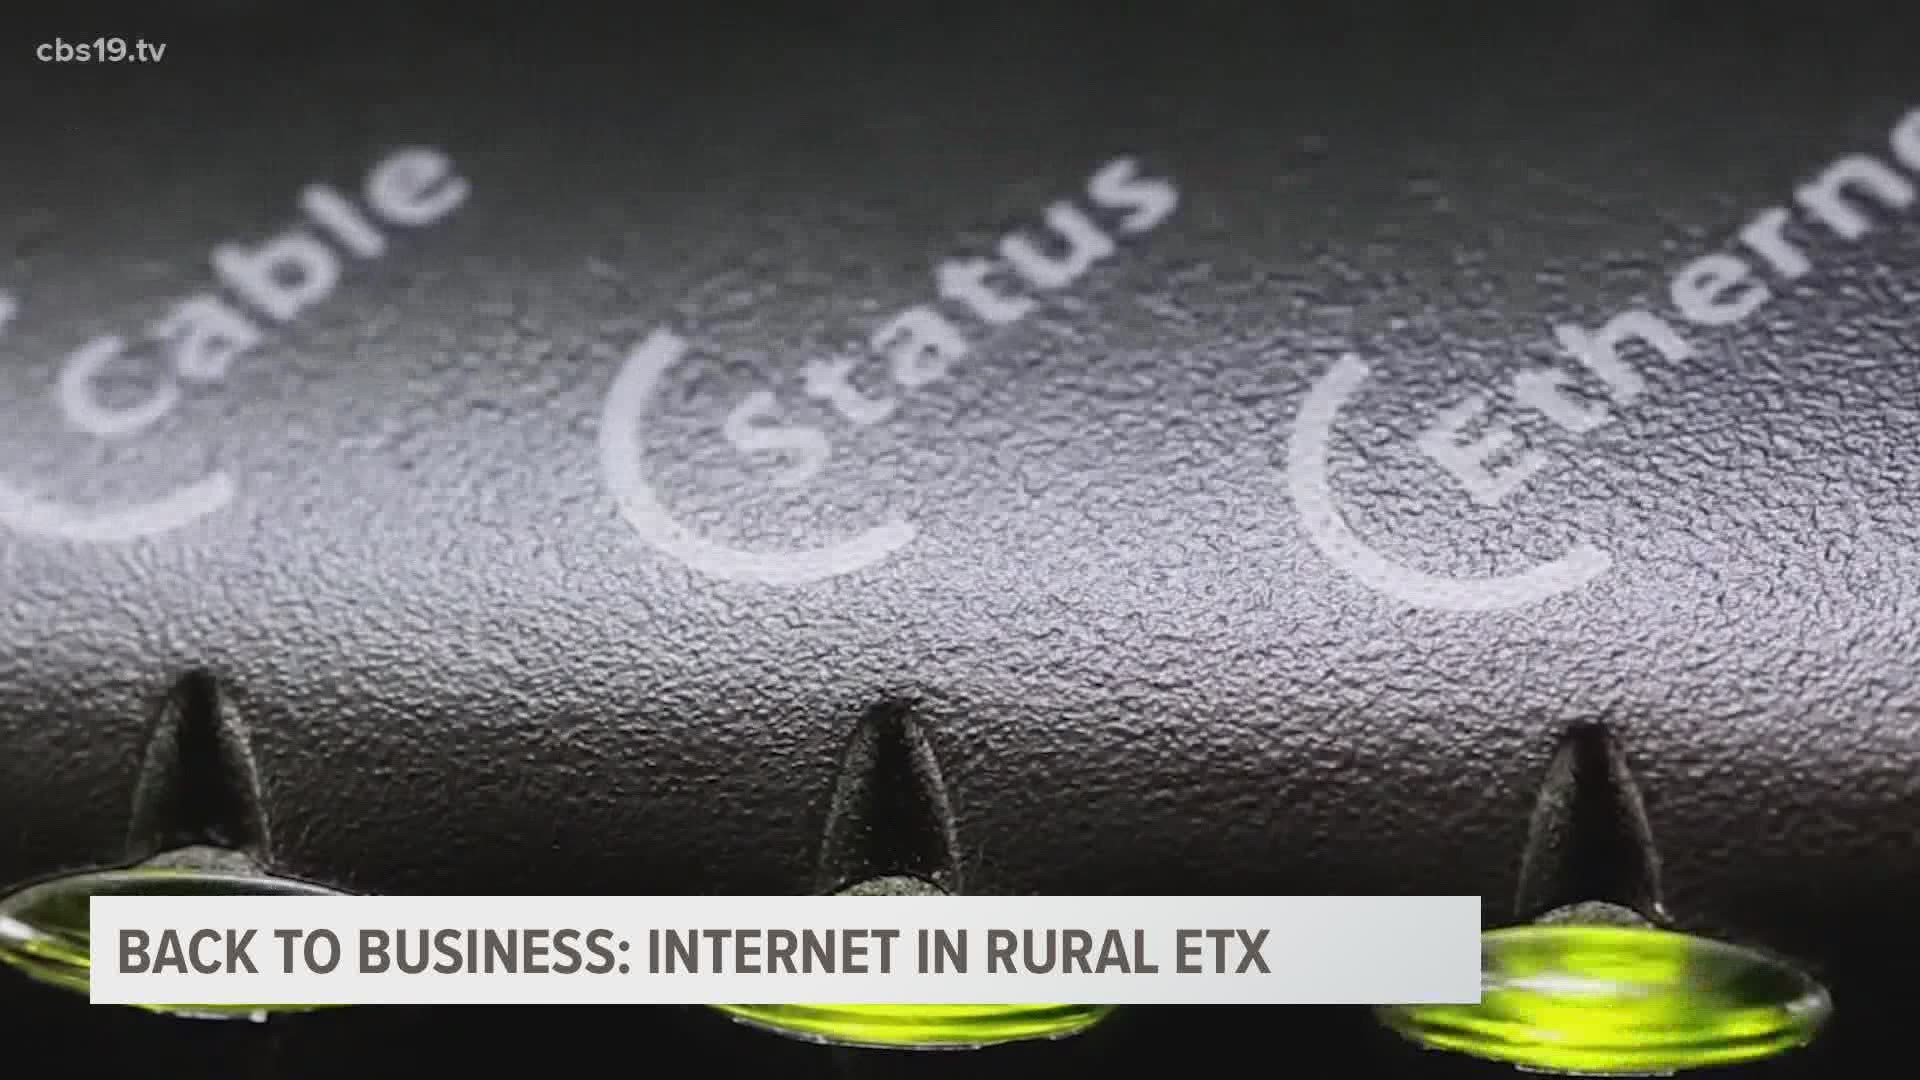 Until recently, rural areas didn't have reliable high-speed internet options. A local company is working to change that.